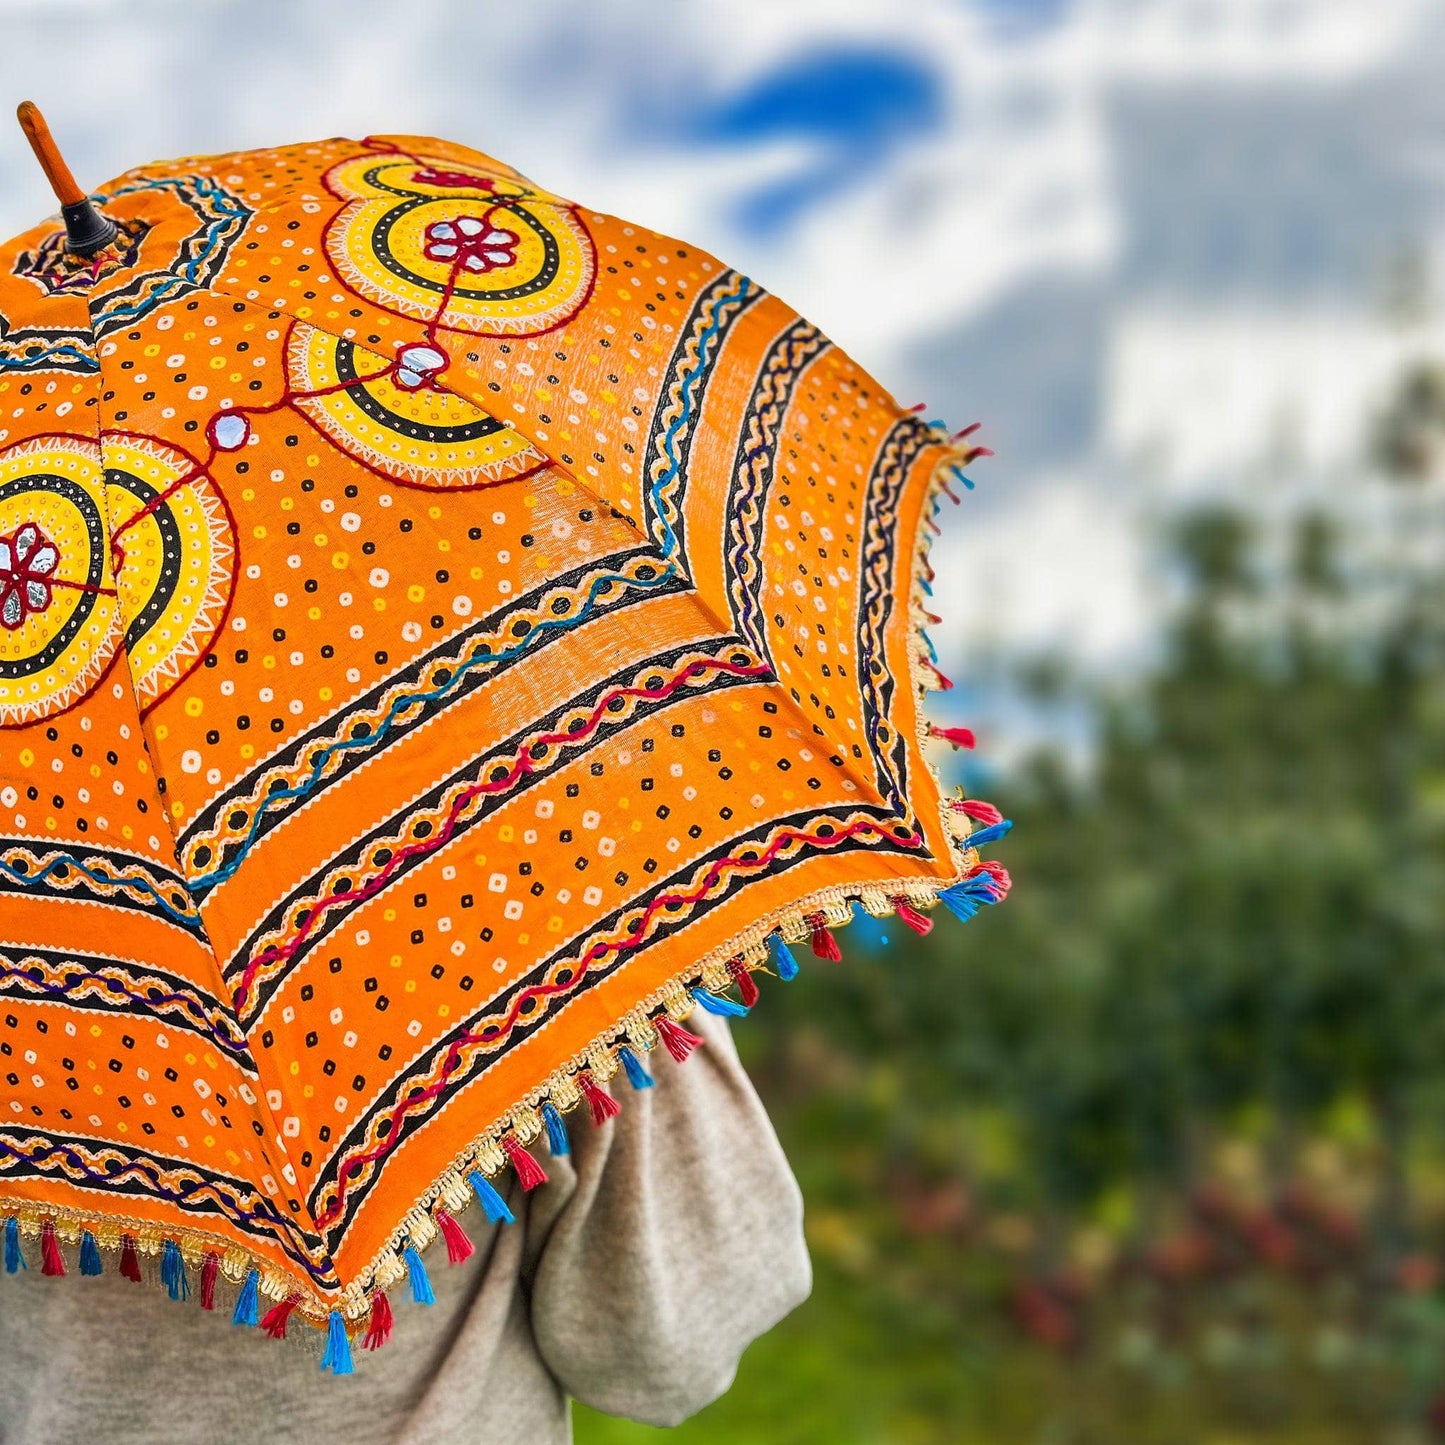 Model is holding an Embellished Parasol Umbrella with blurred trees in the background.